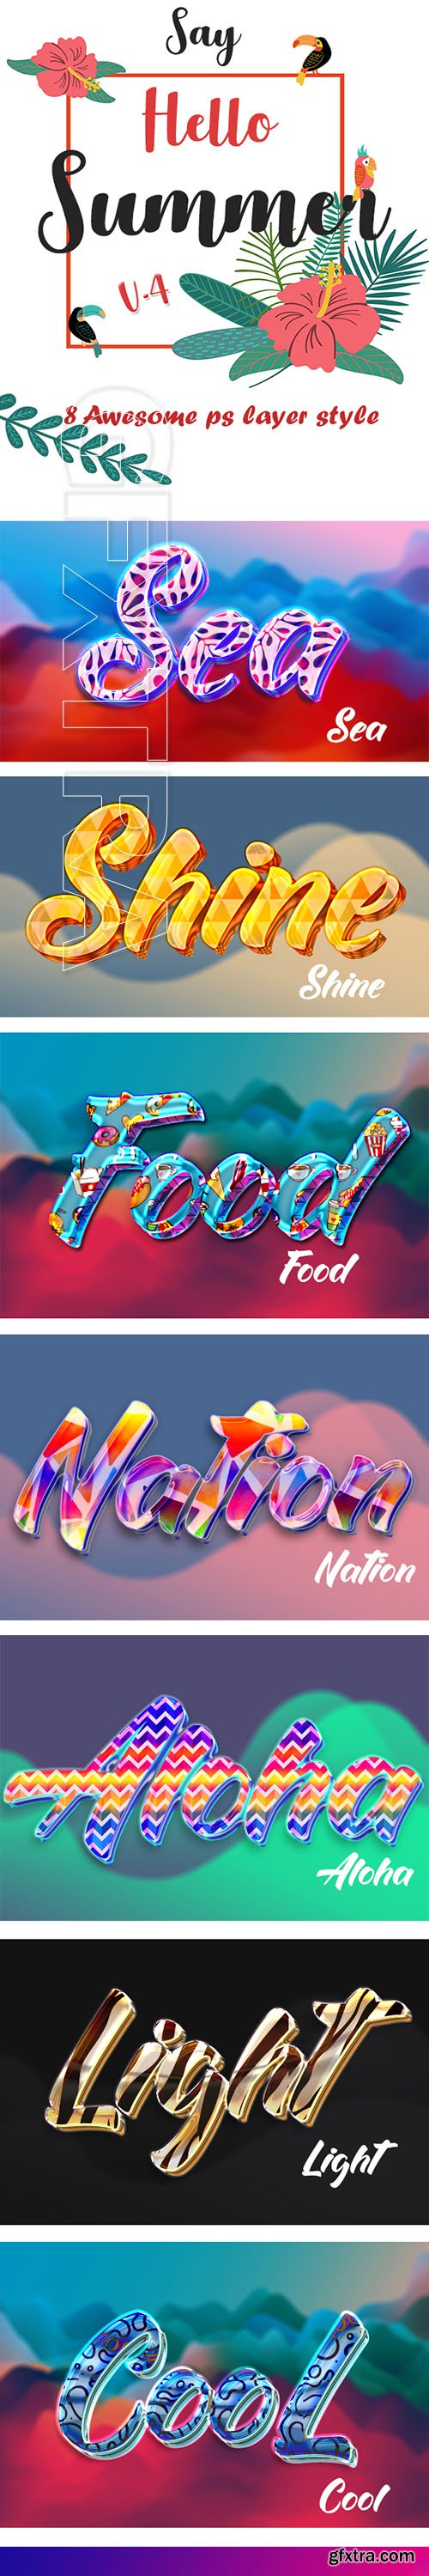 GraphicRiver - Summer Text effects v 4 22463690